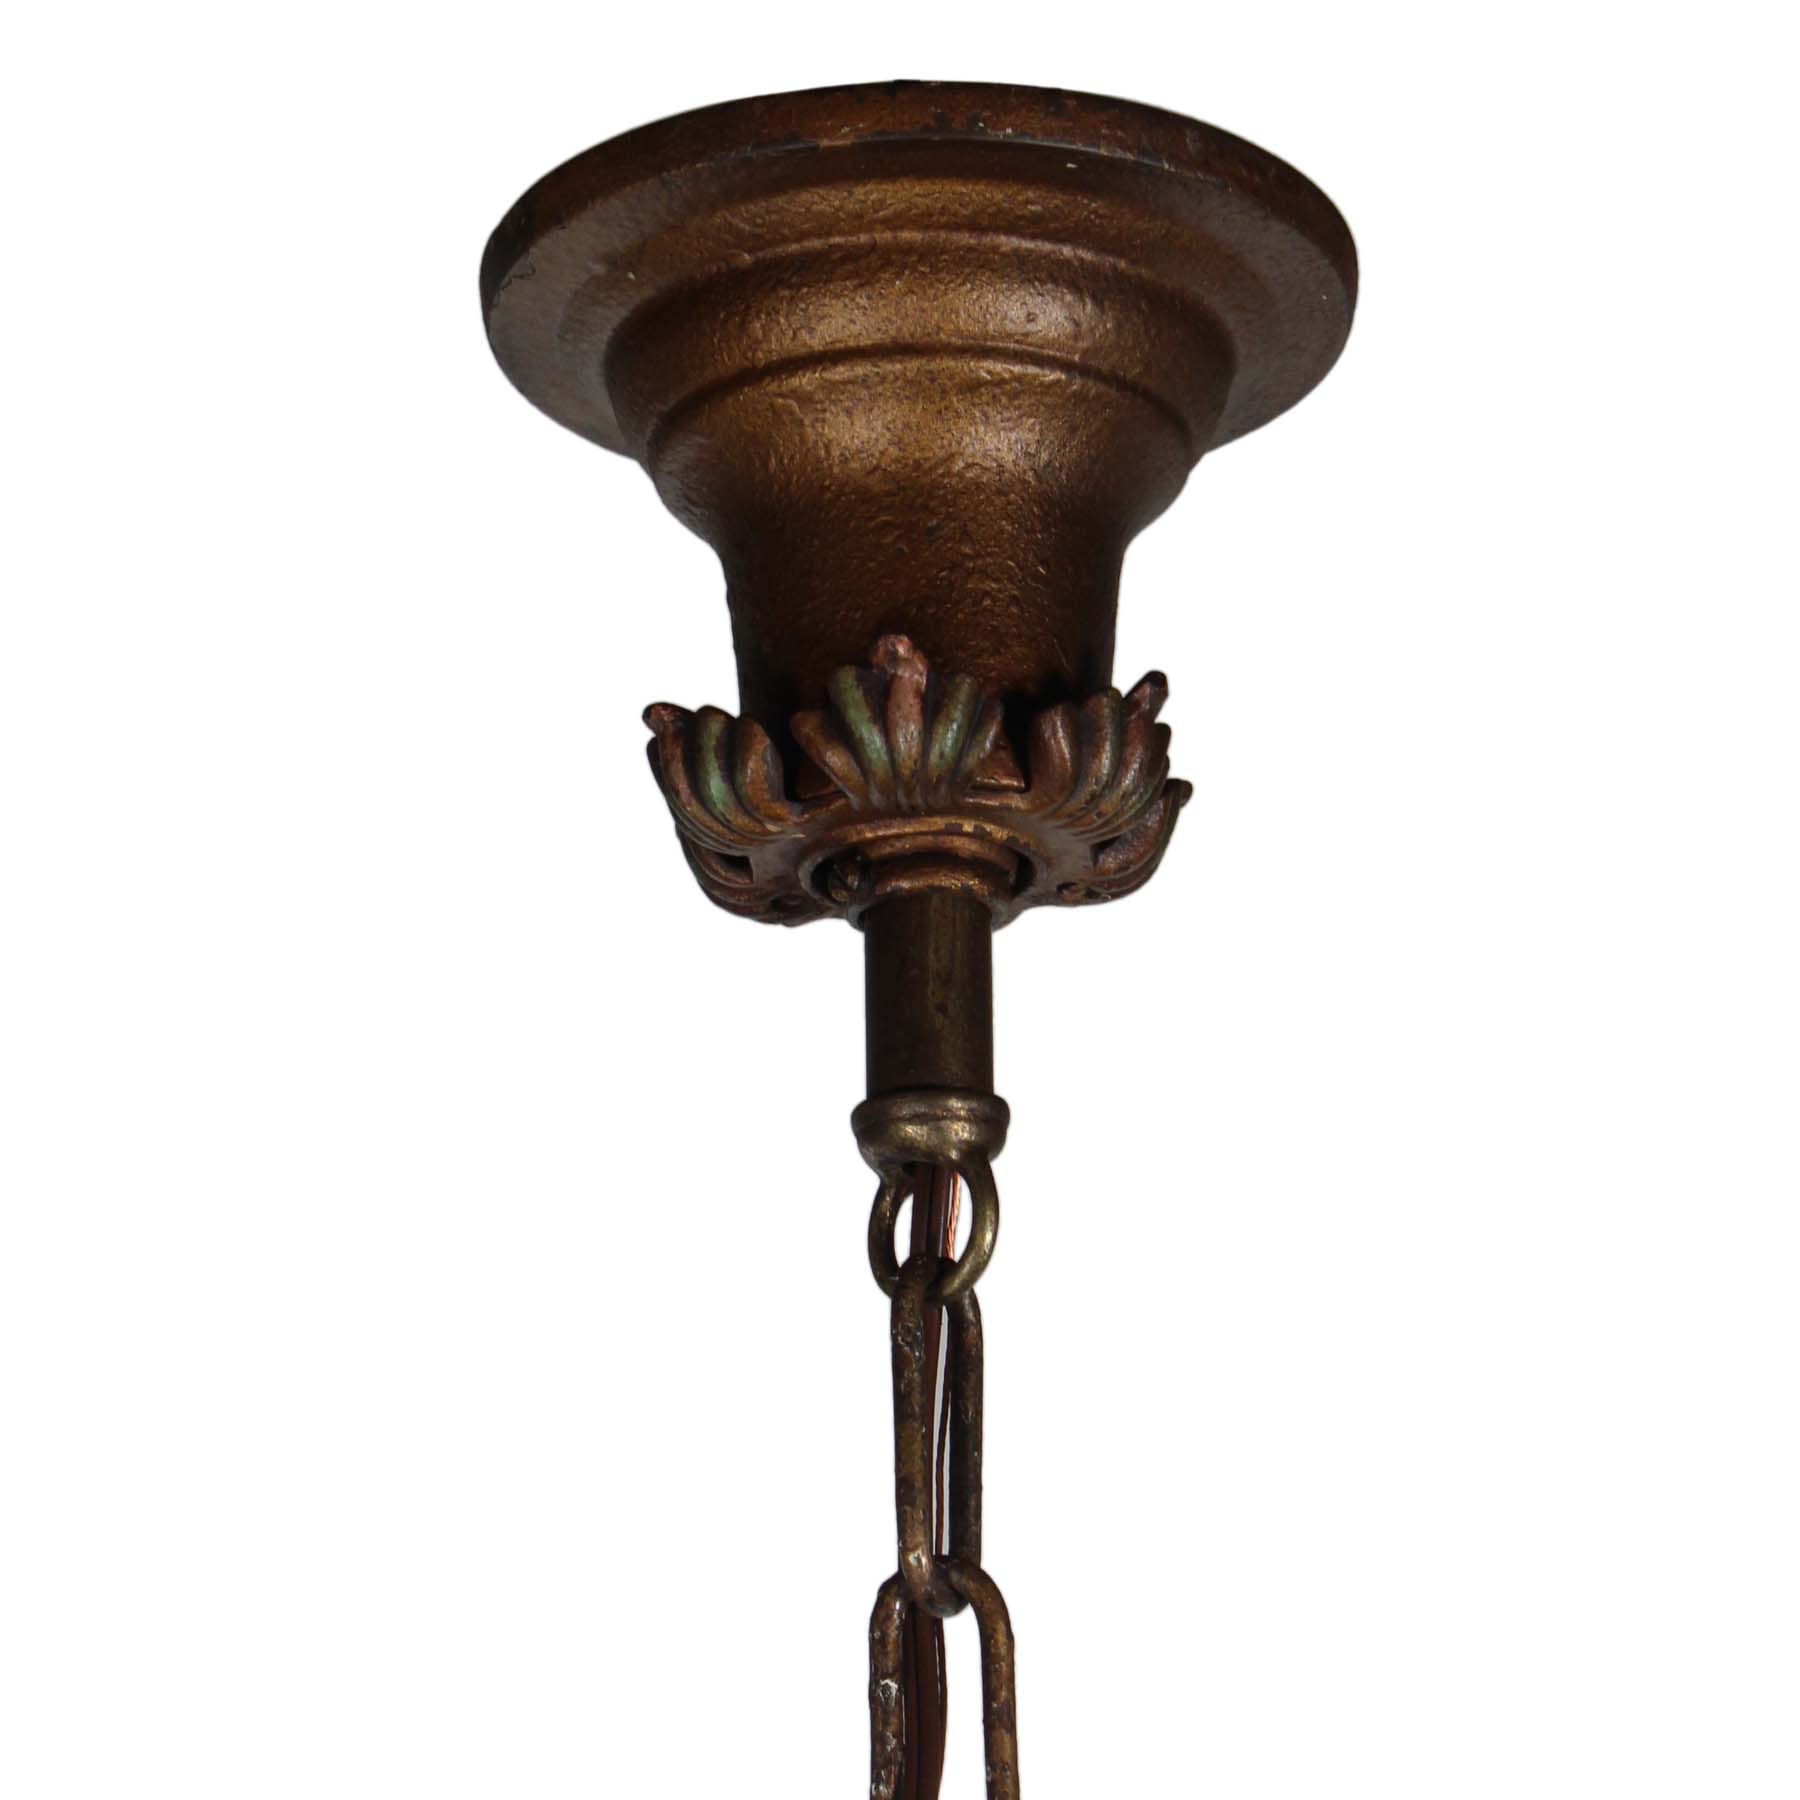 SOLD Antique Five-Light Iron Chandelier with Flowers, c. 1920s -70667